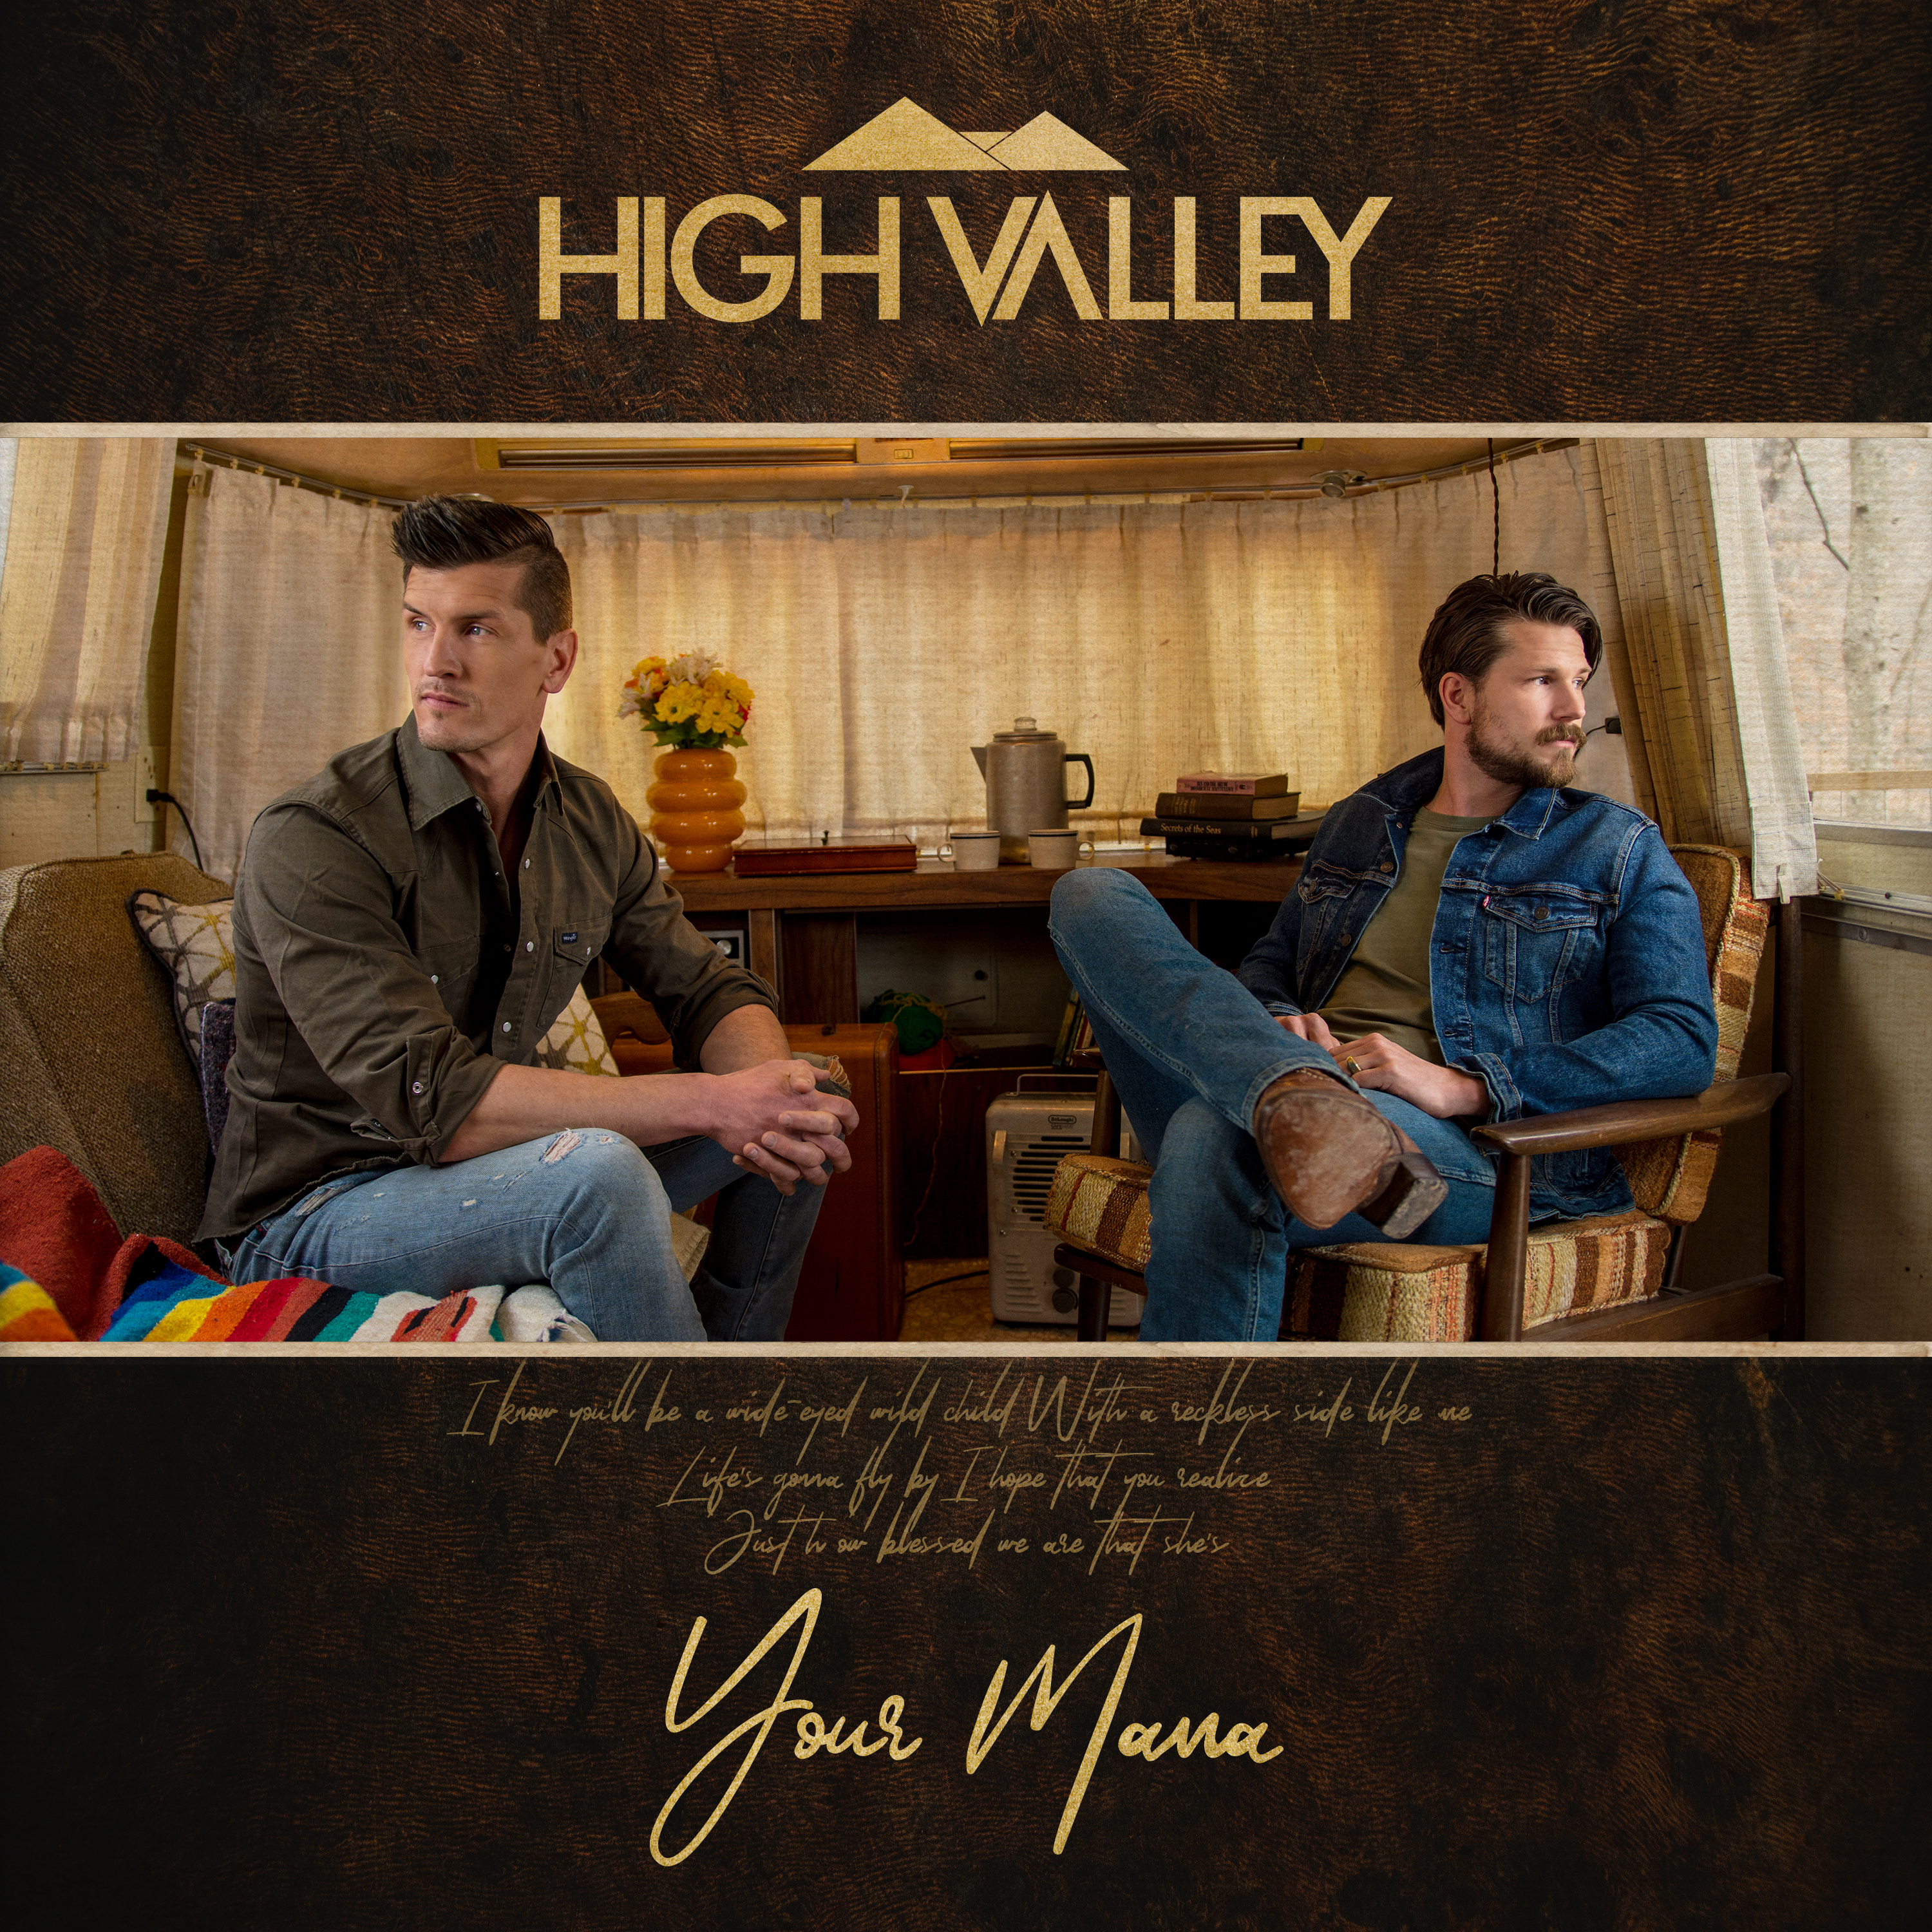 HIGH VALLEY GIVE CREDIT TO “YOUR MAMA” IN FAMILY-DRIVEN NEW SONG